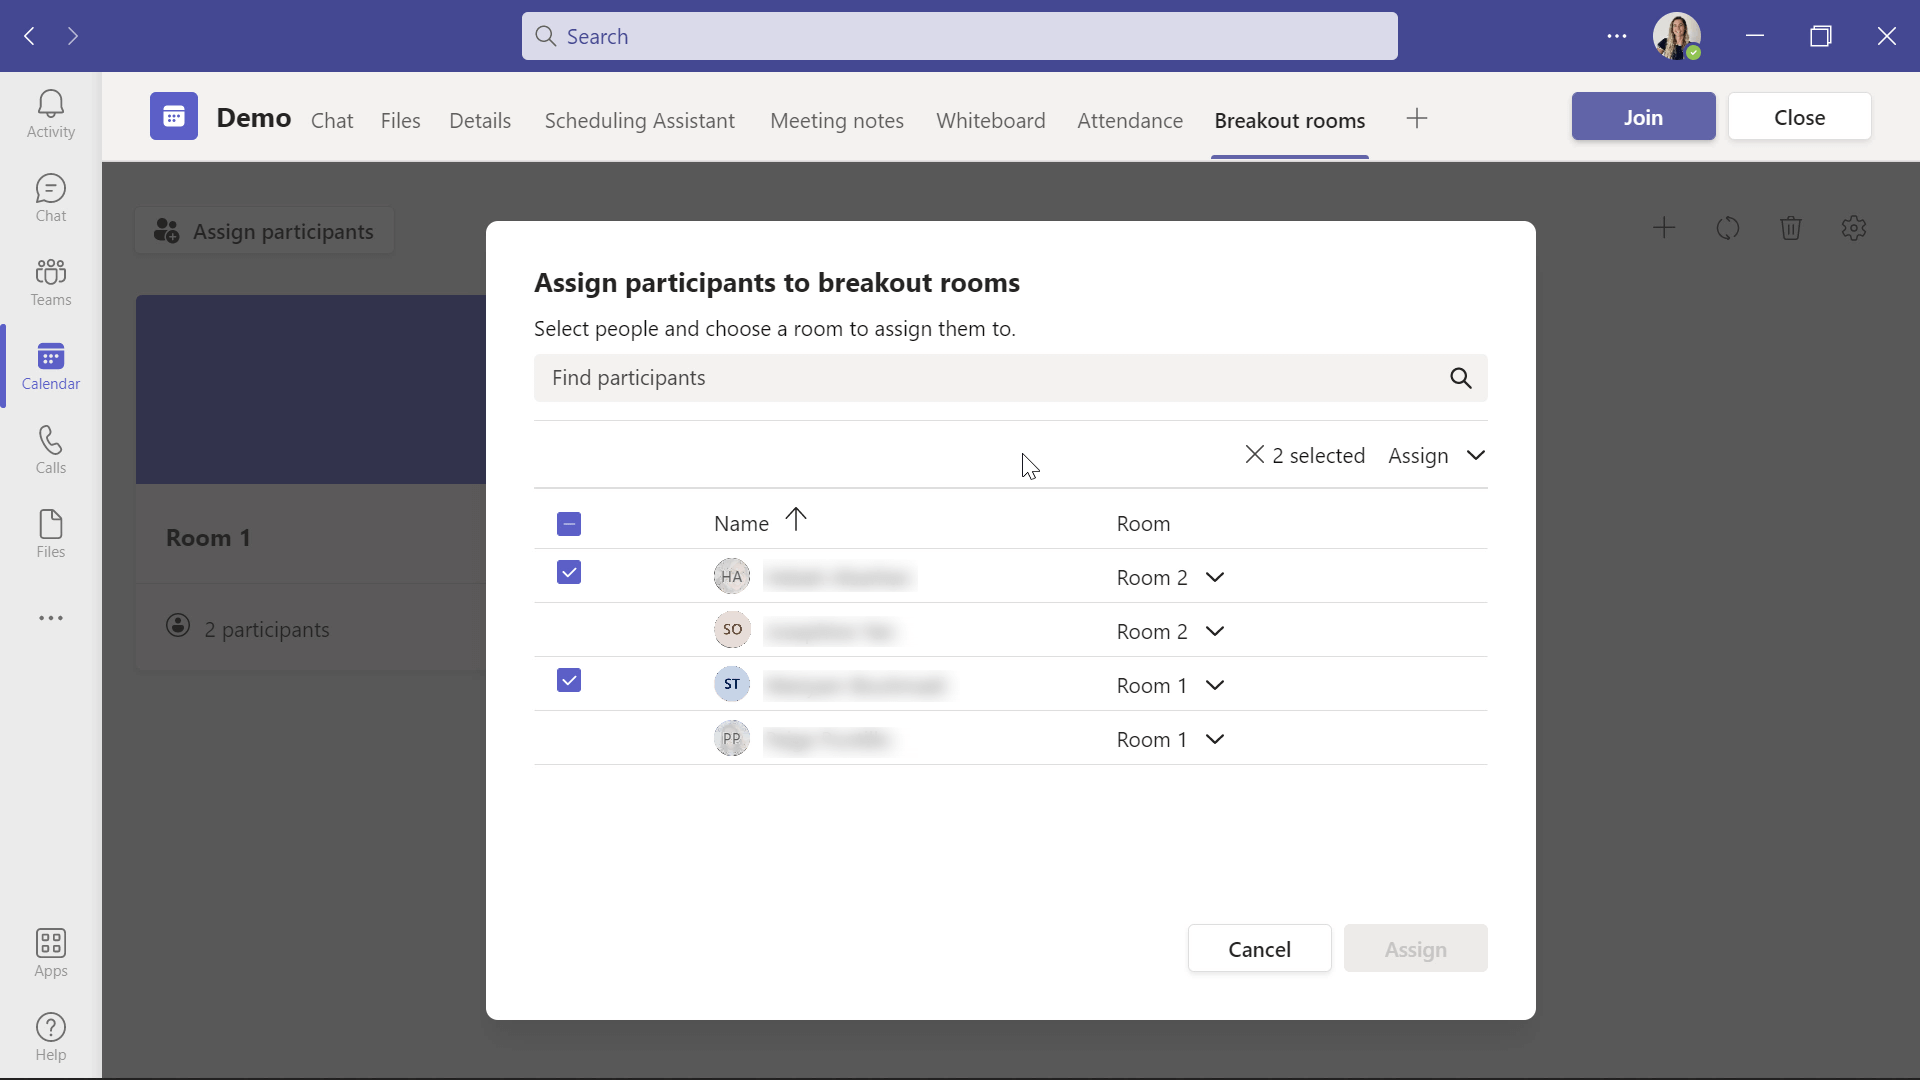 assign participants to breakout rooms in Microsoft Teams